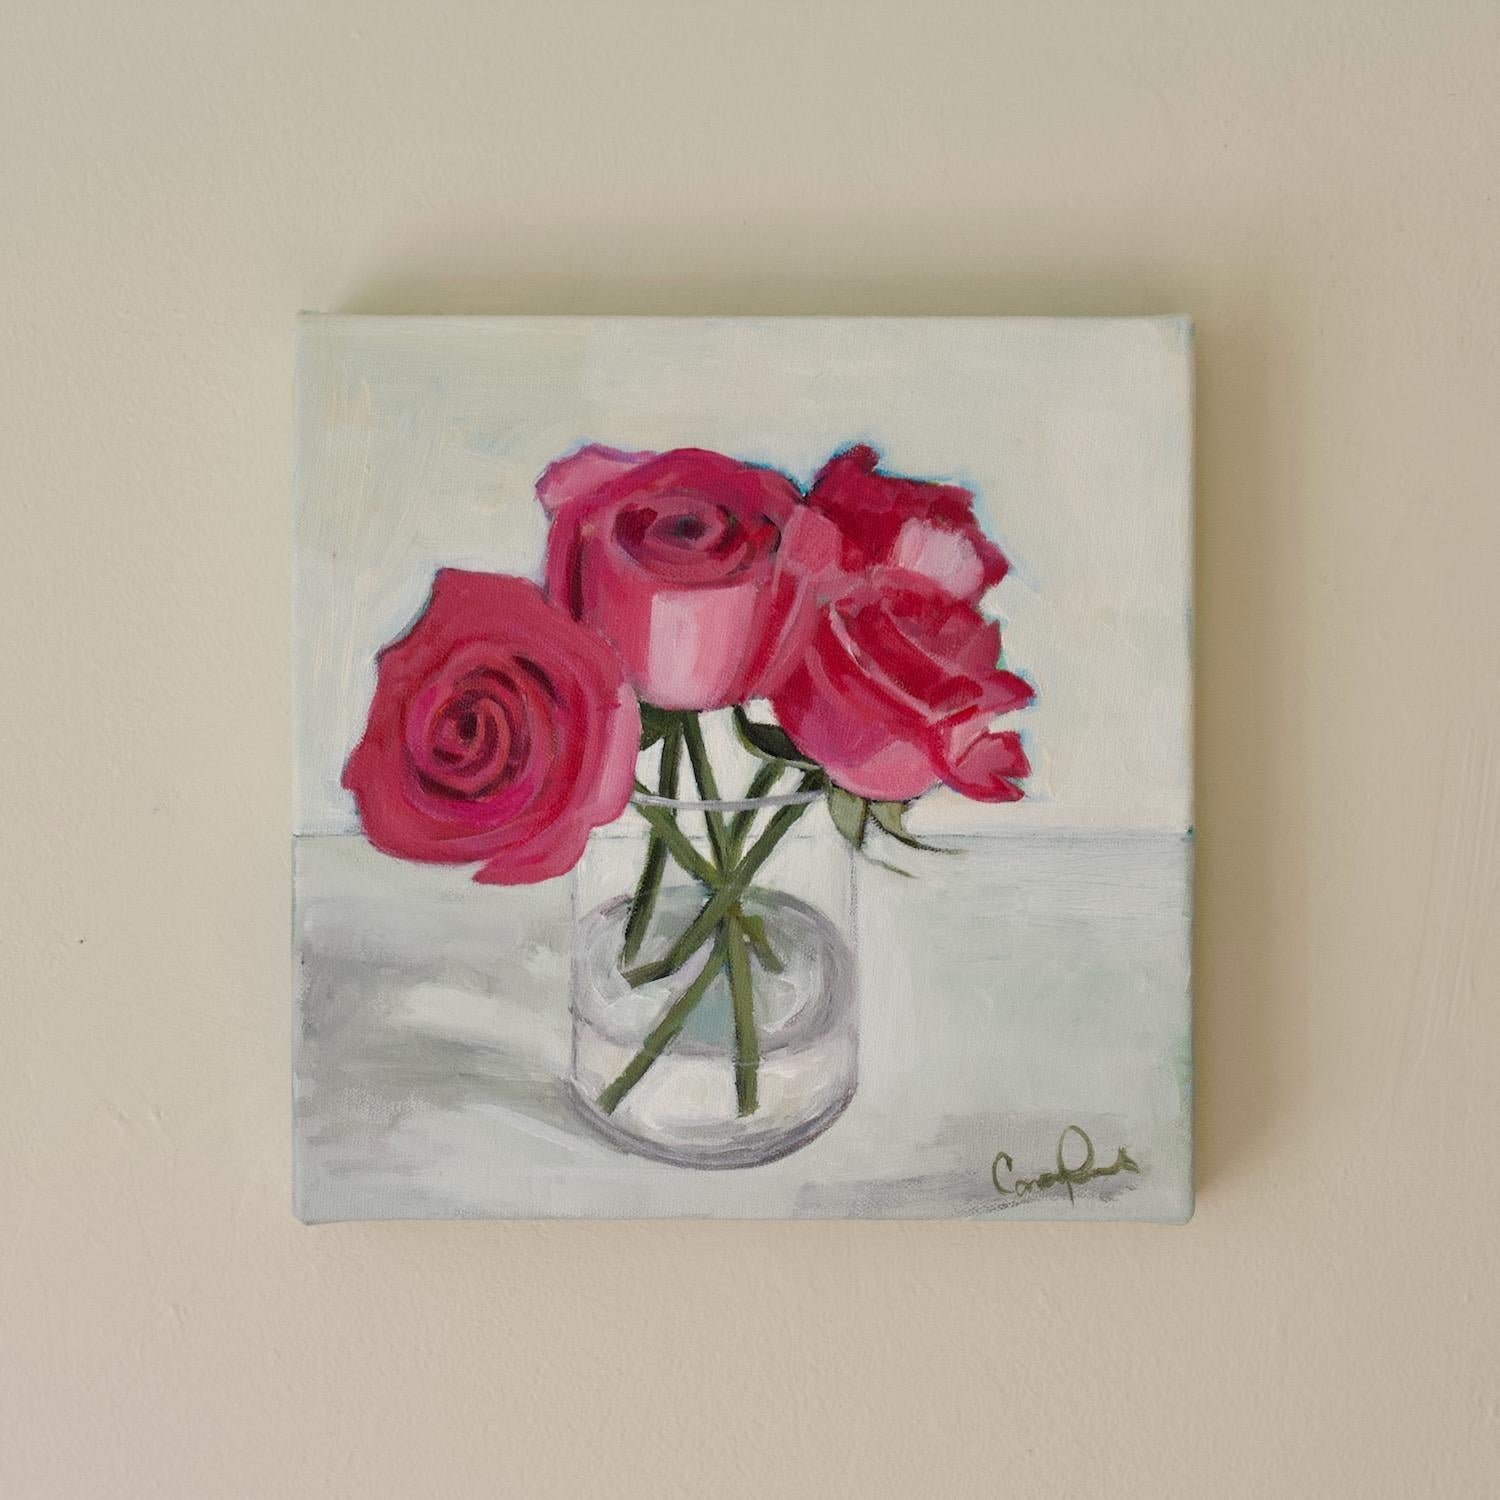 <p>Artist Comments<br>This still-life painting features roses in a clear glass vase. The flowers' velvety red hues contrast beautifully with their green stems, making them stand out against the muted background. The simple yet elegant composition